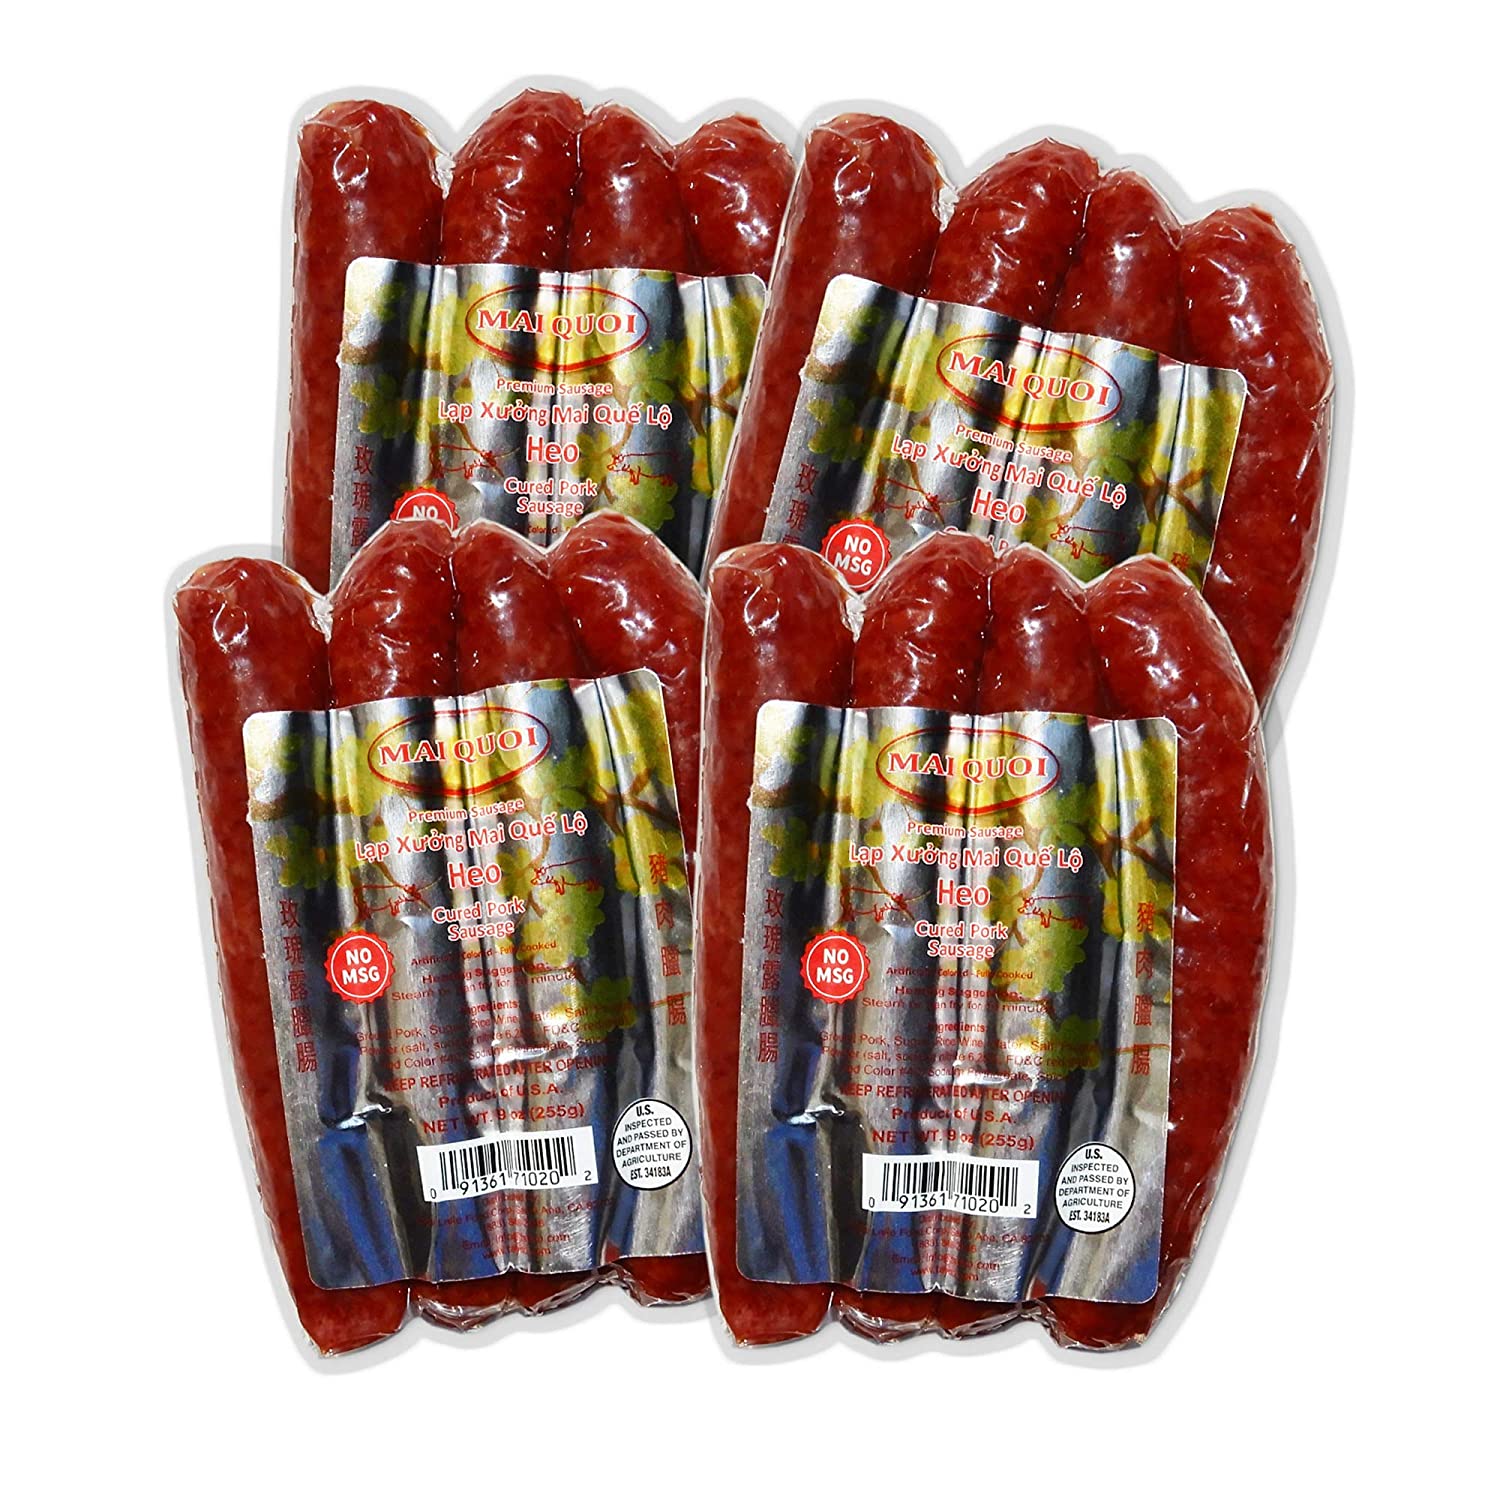 4 Packs of Gourmet Pork Chinese Style Sausage (Lap Xuong Mai Quoi Pork) (No MSG) – Made In USA